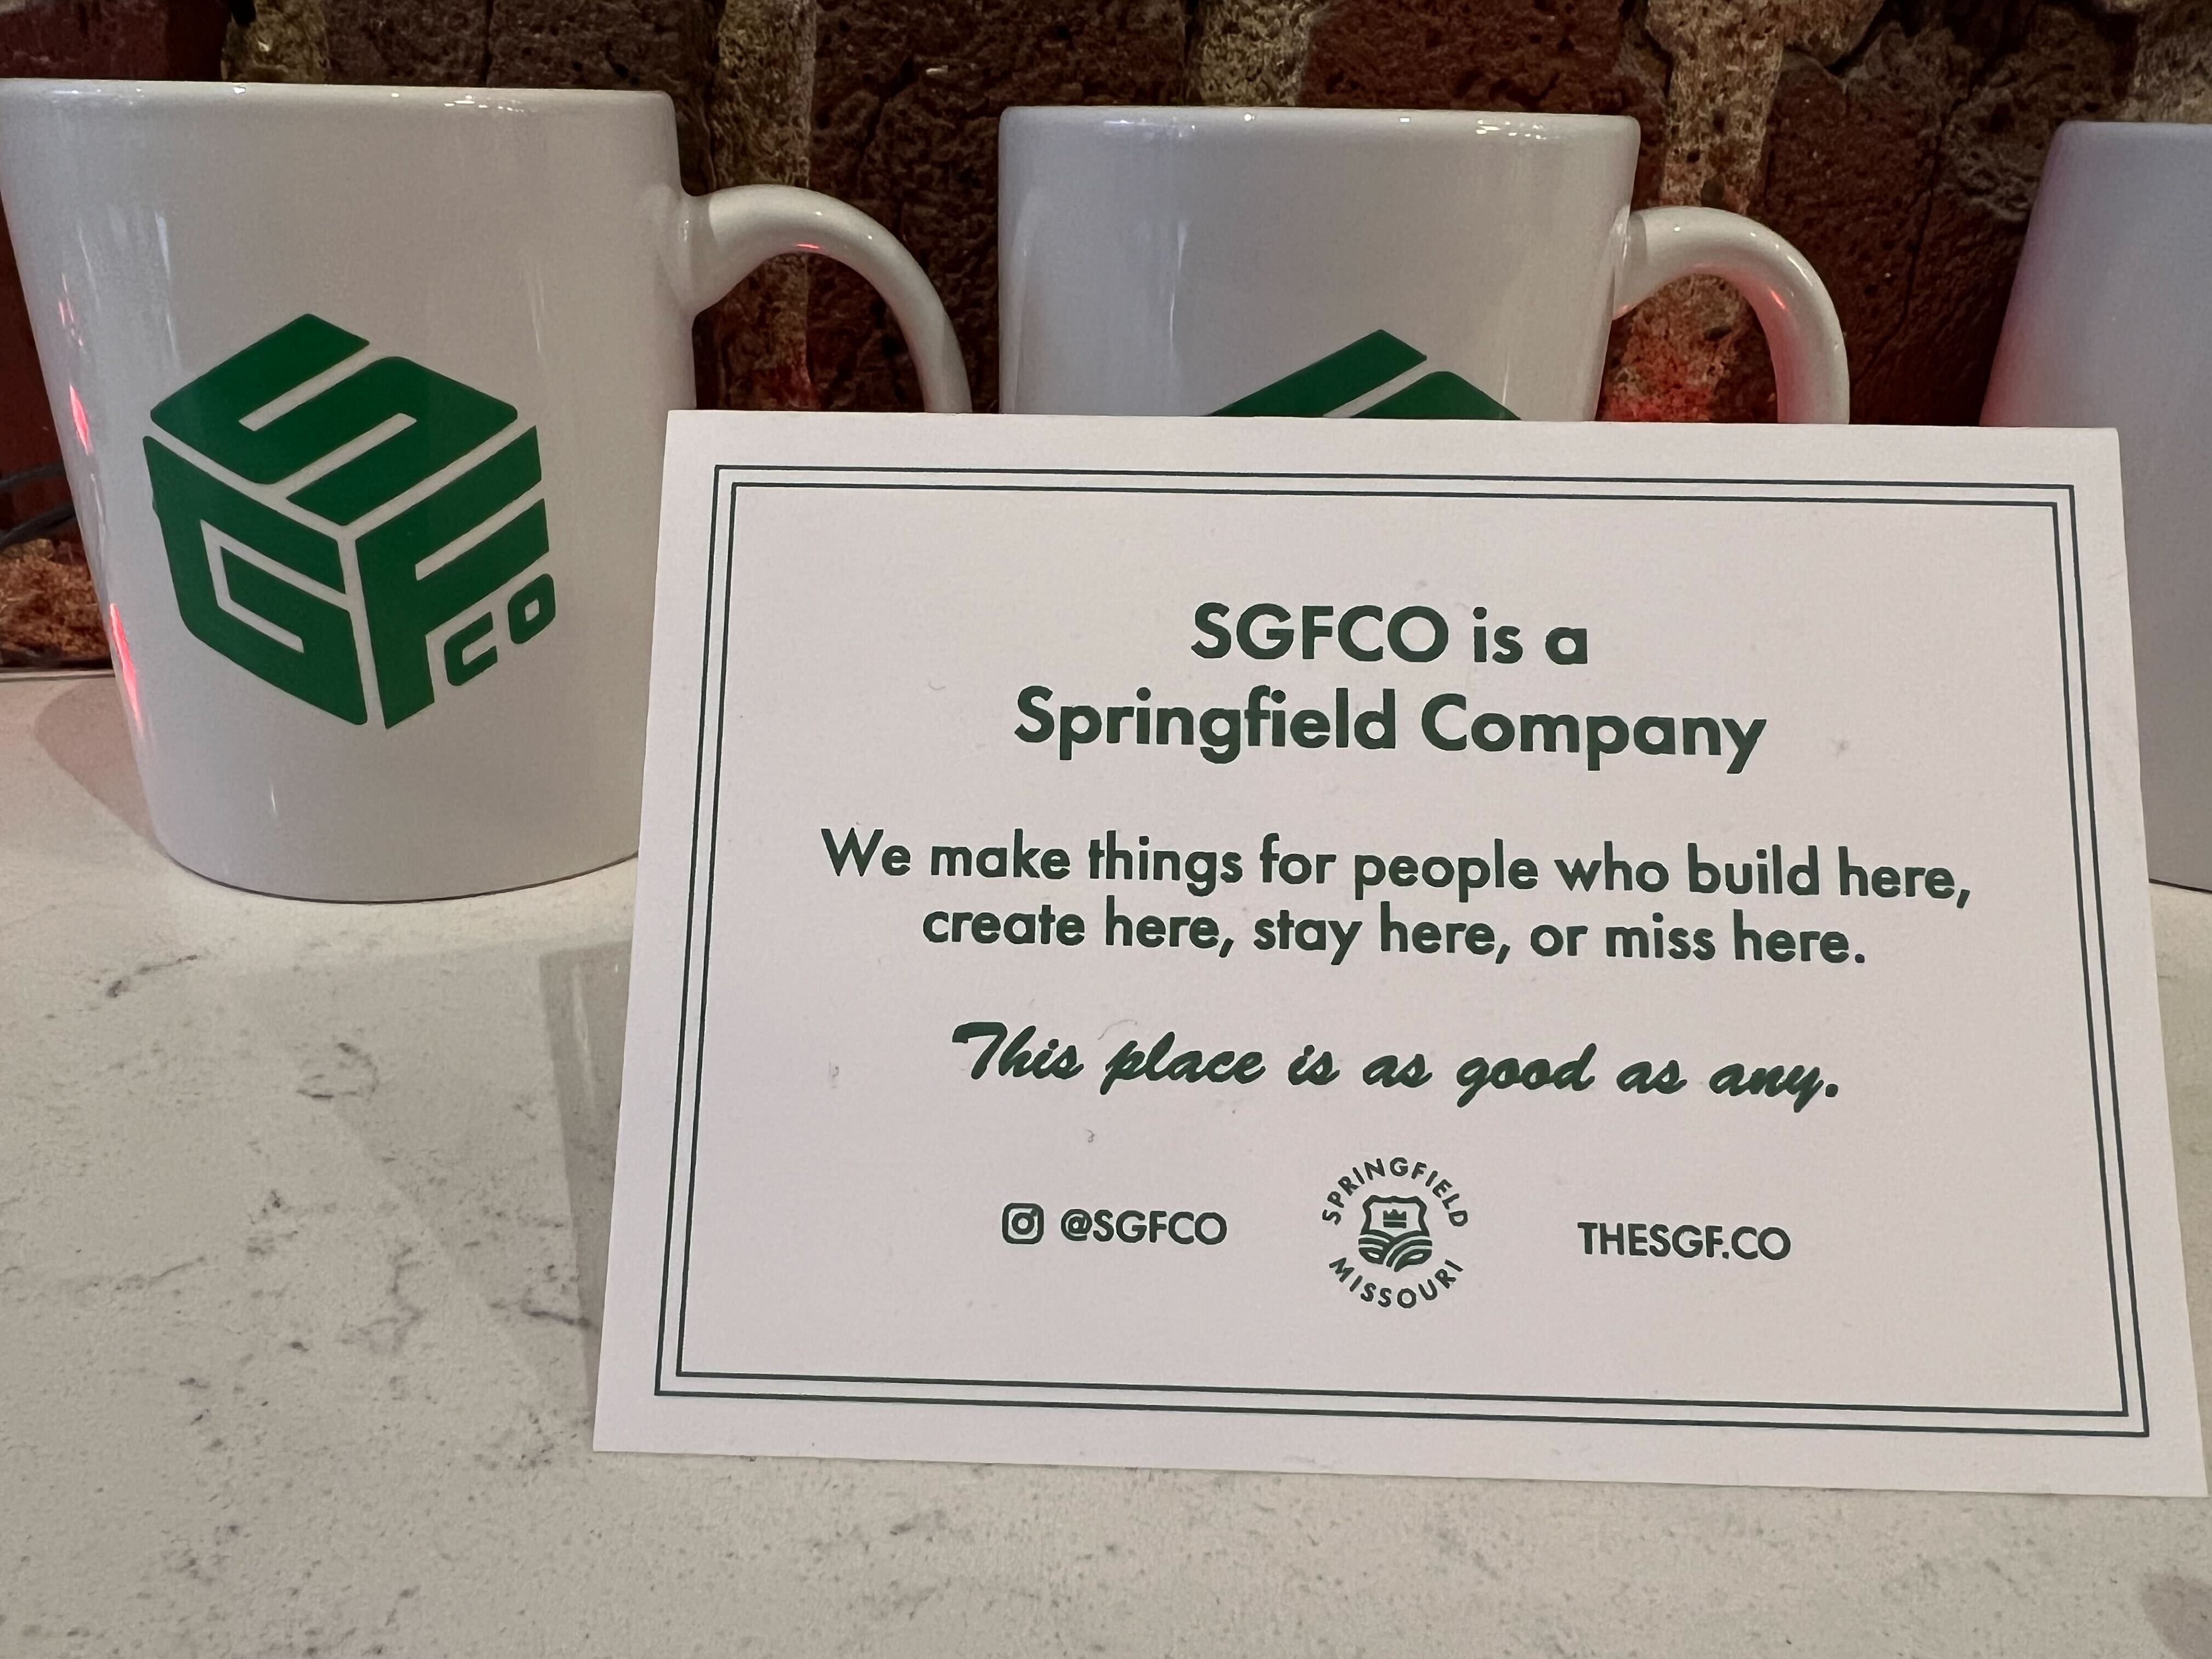 A white mug sits on a counter with a sign advertising SGFCO